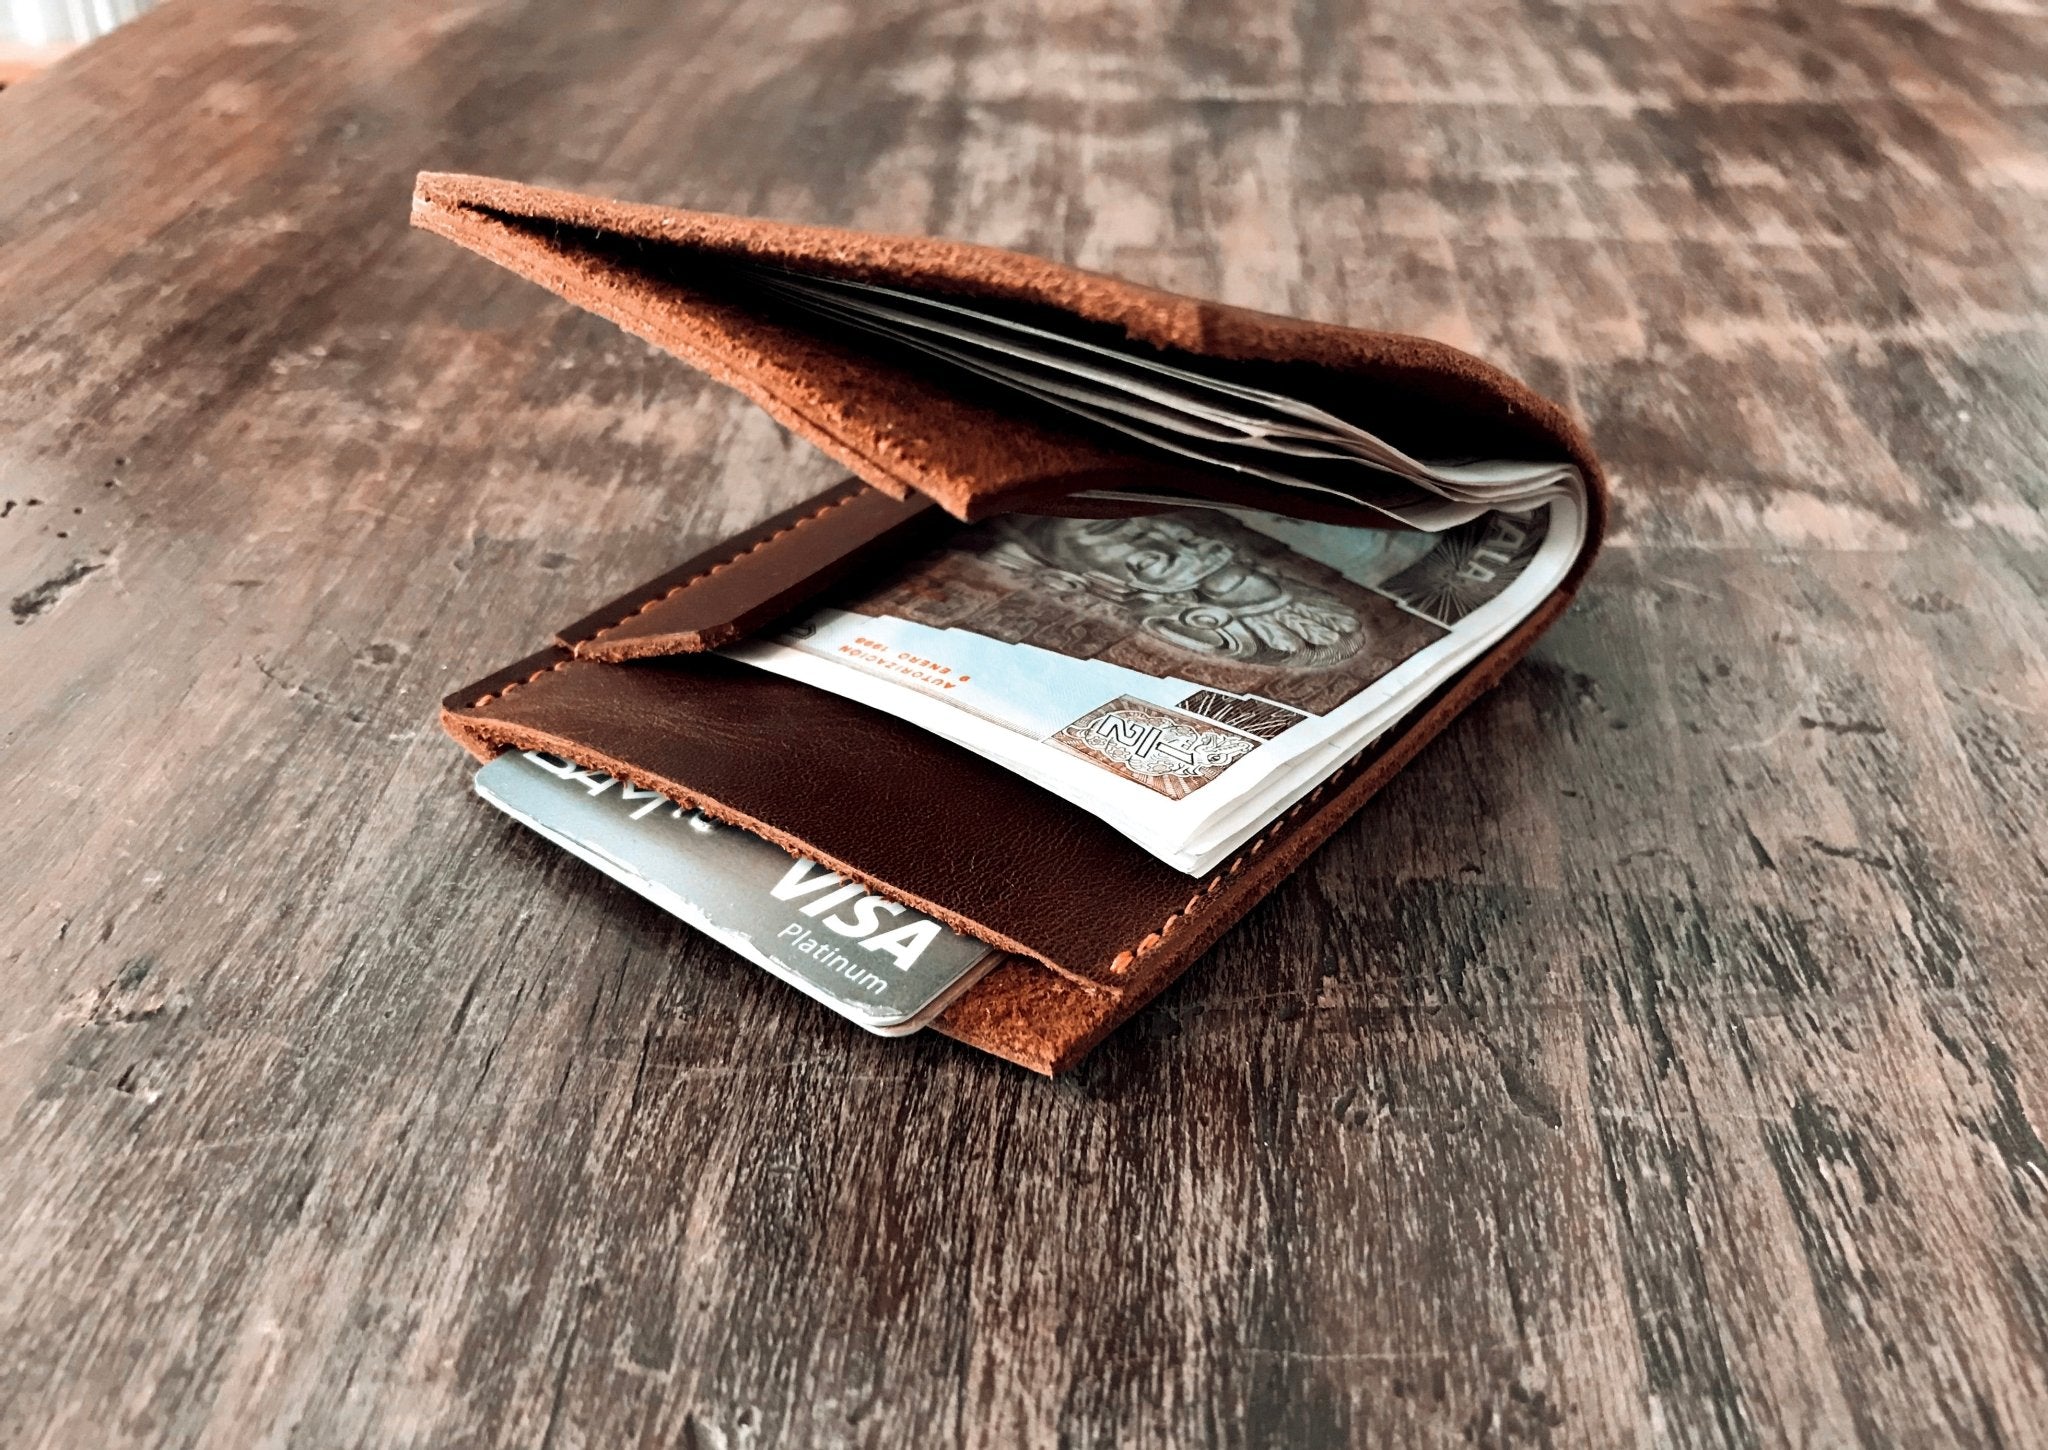 The Wallet - SIMPLE Leather Goods